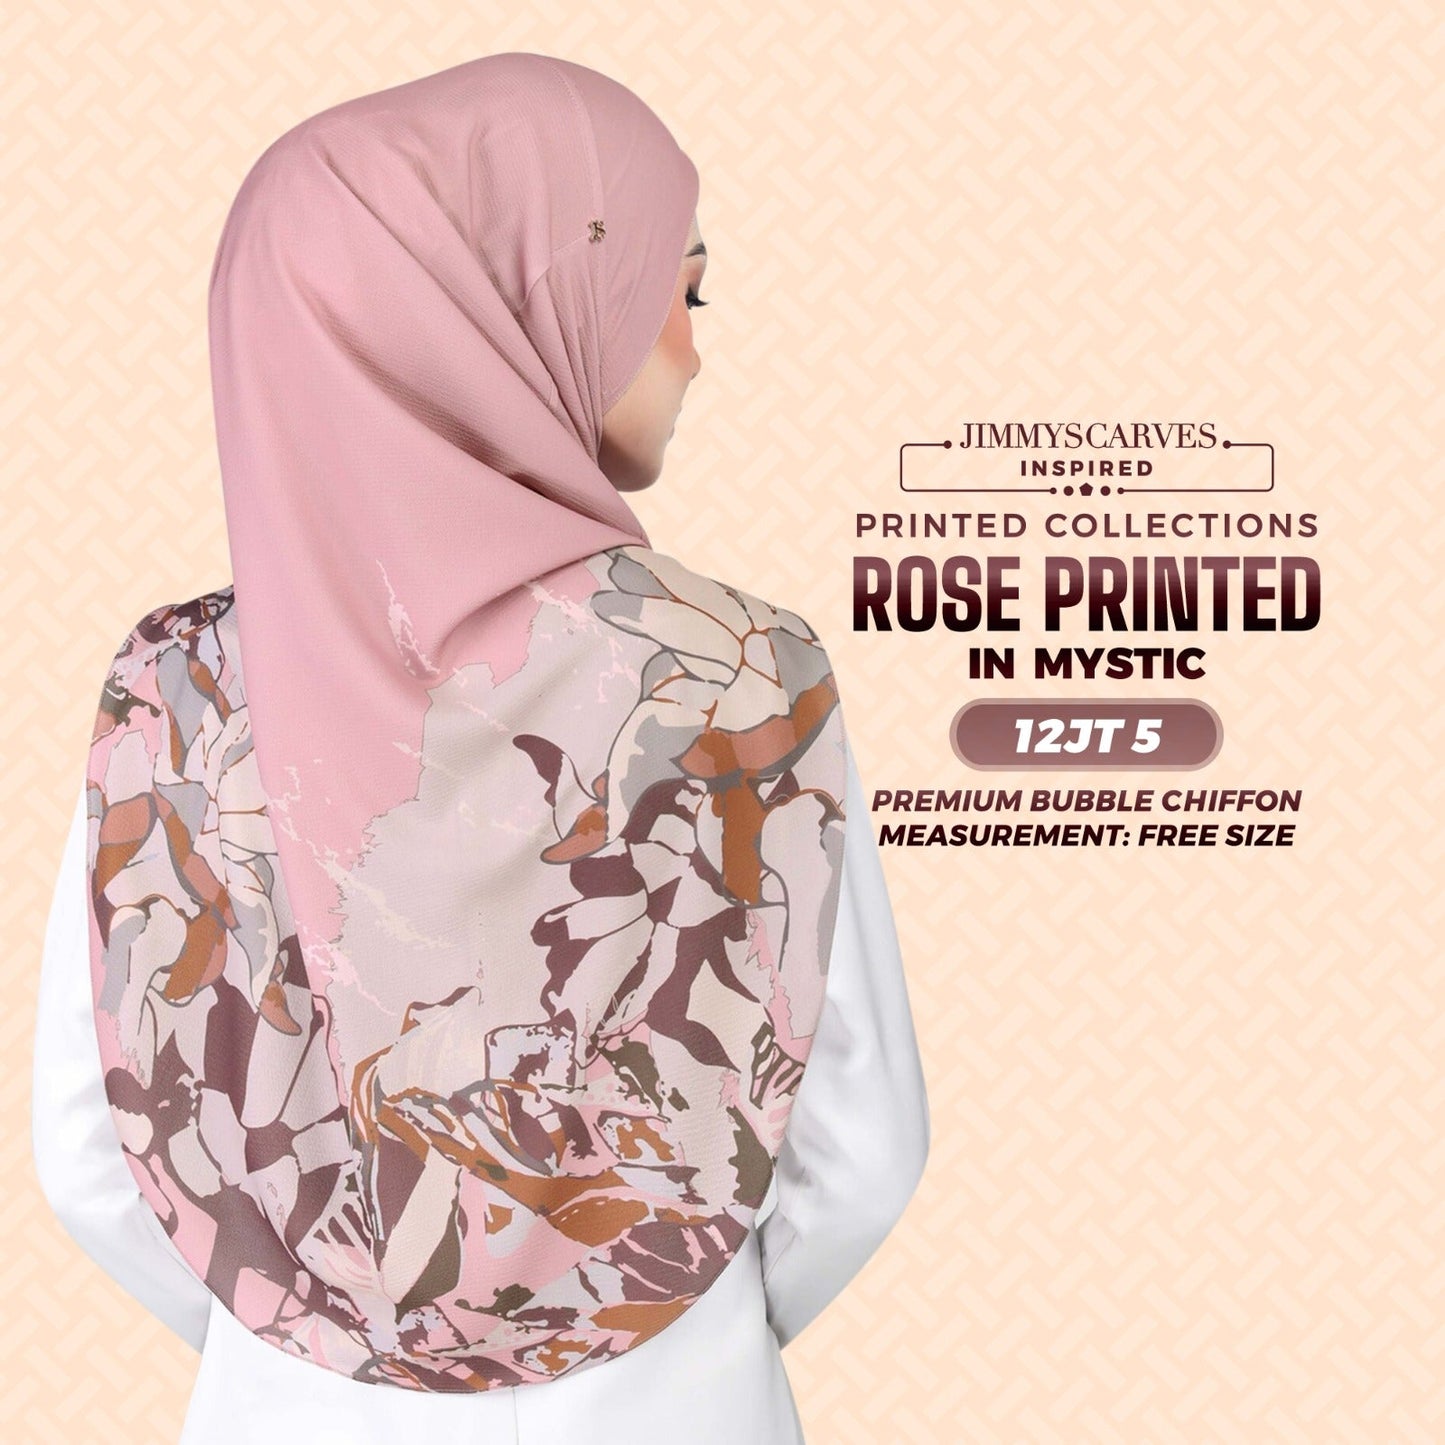 Jimmy Scarves Rose Printed Collection